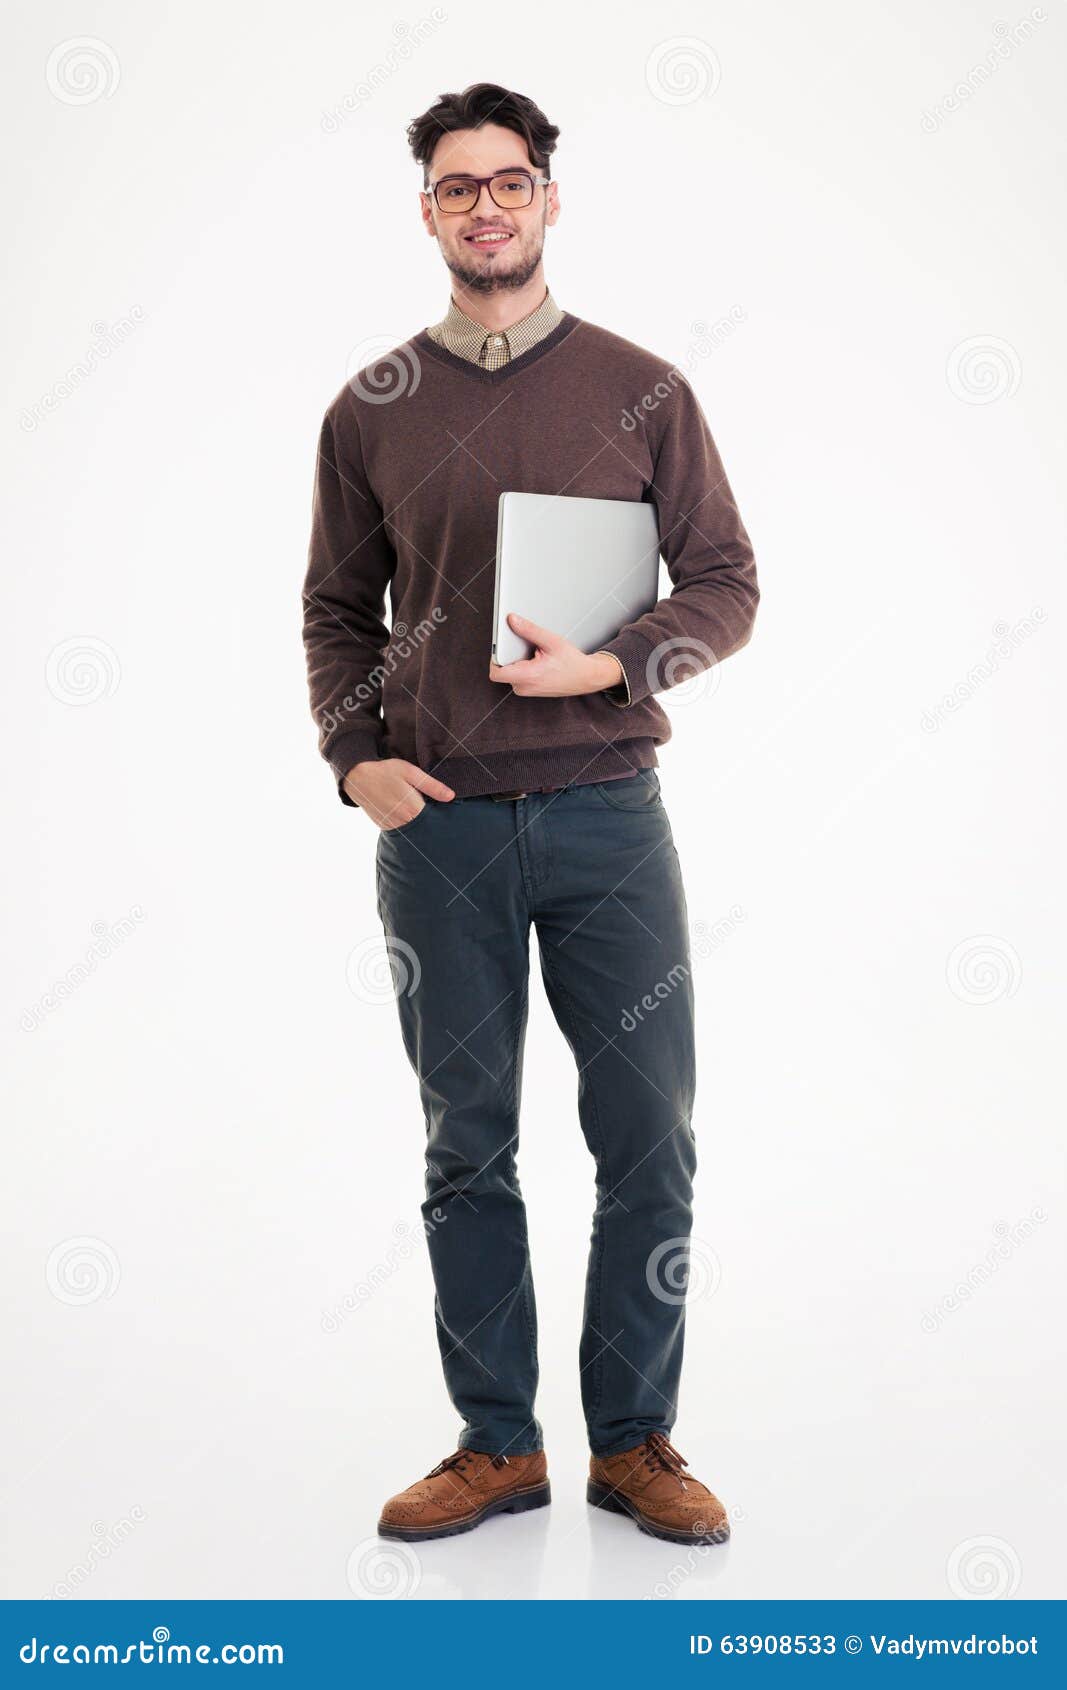 Smiling Man Holding Laptop Computer and Looking at Camera Stock Image ...